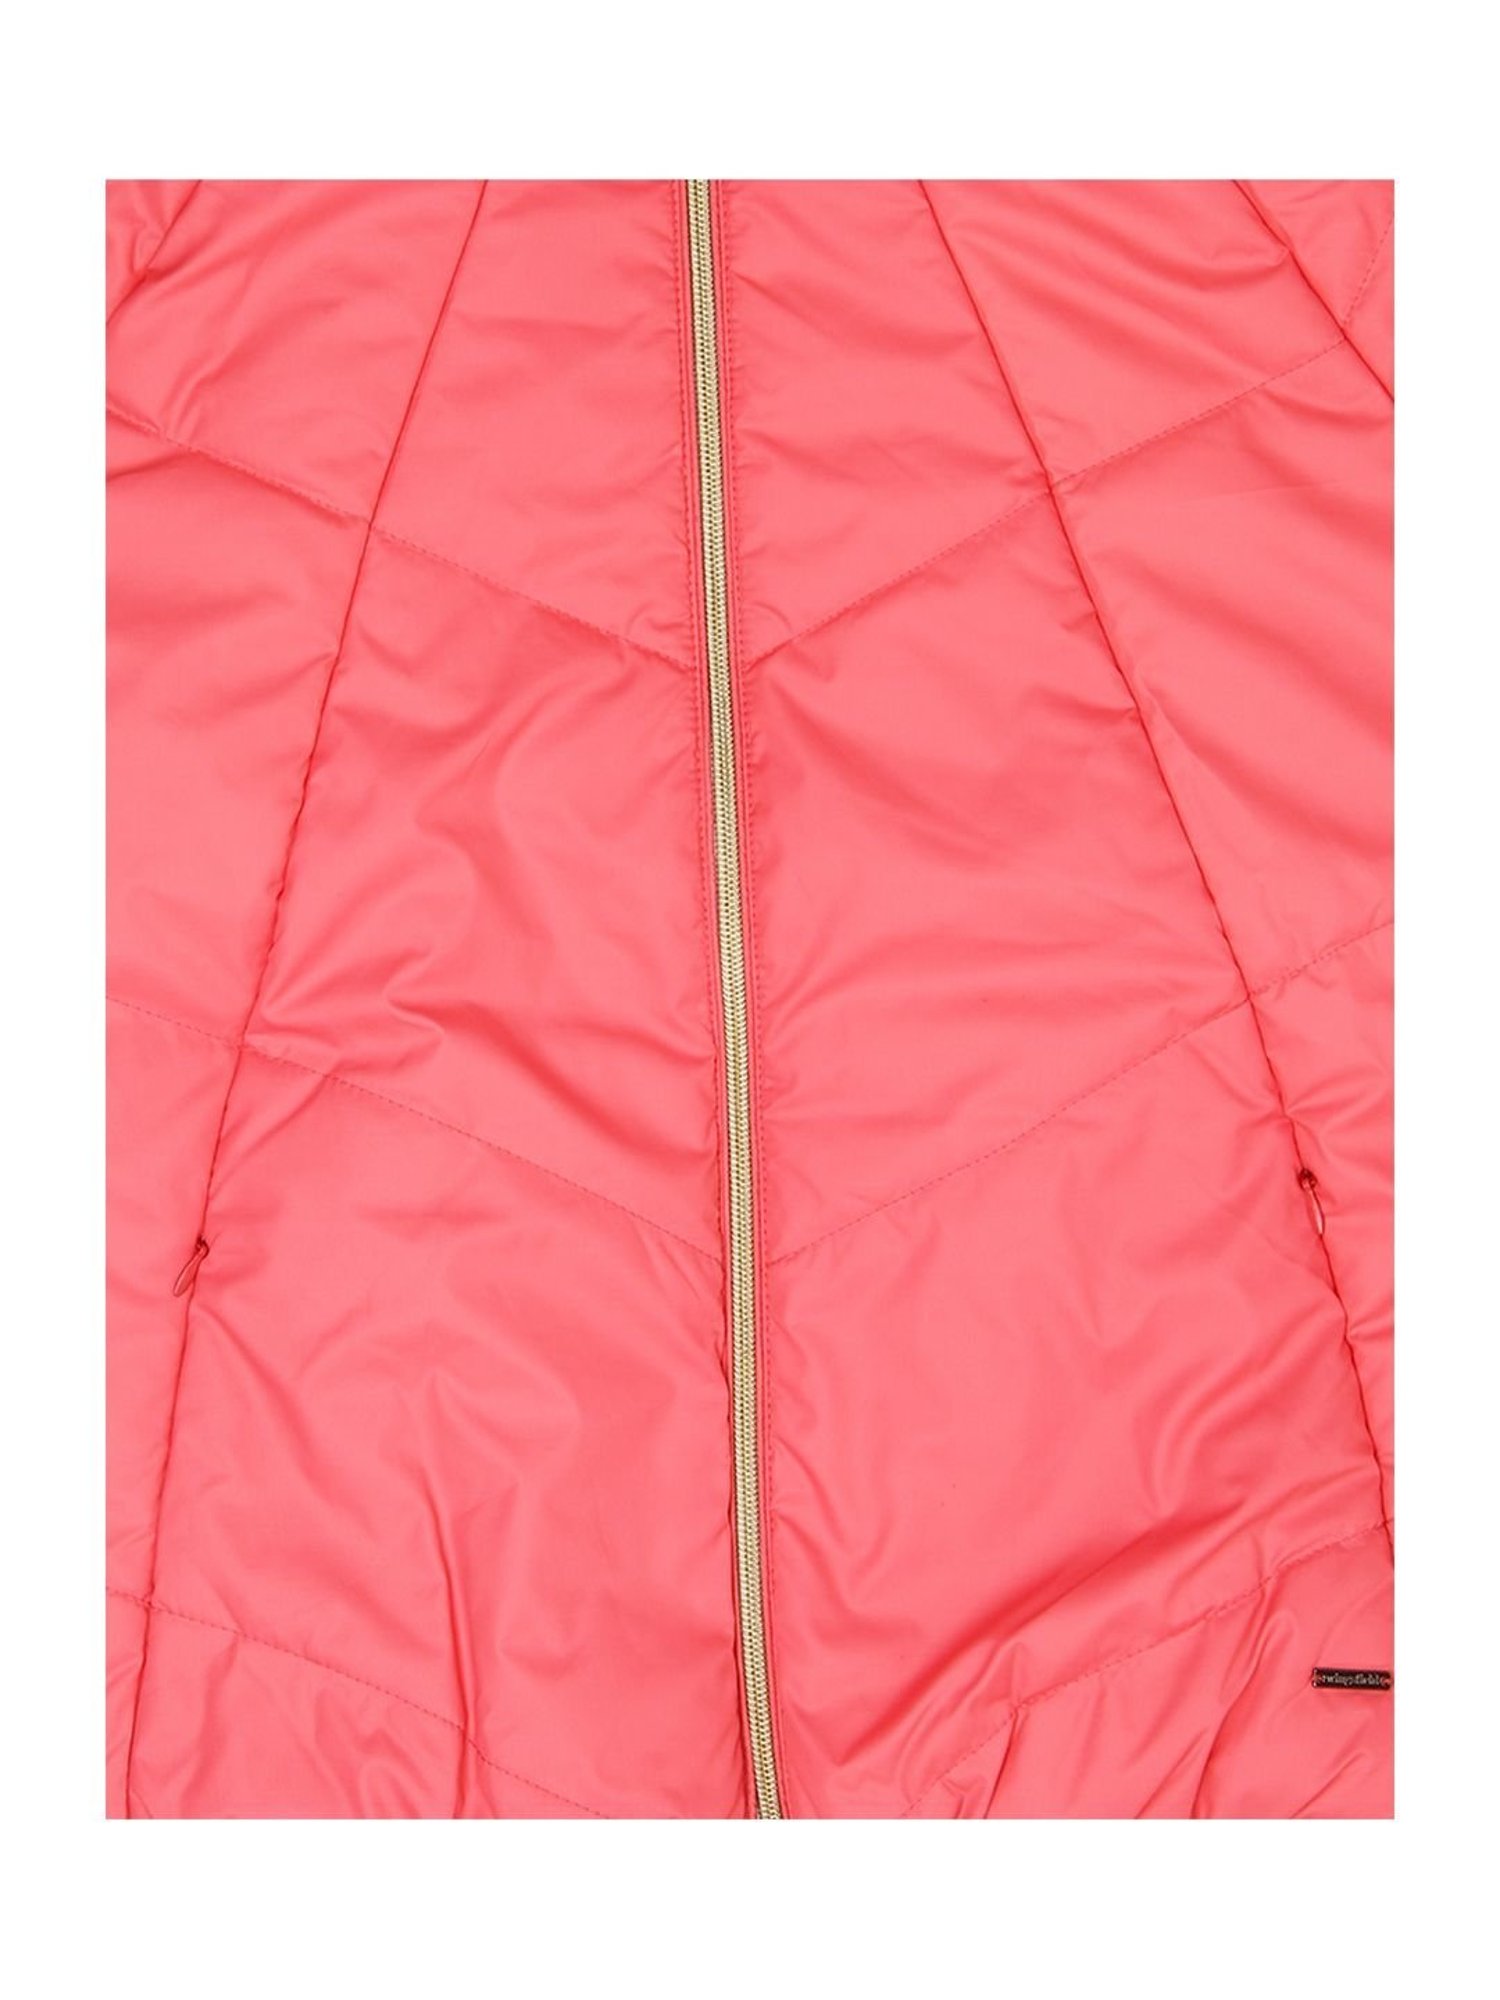 Buy Wingsfield Kids Pink Jacket for Girls Clothing Online @ Tata CLiQ